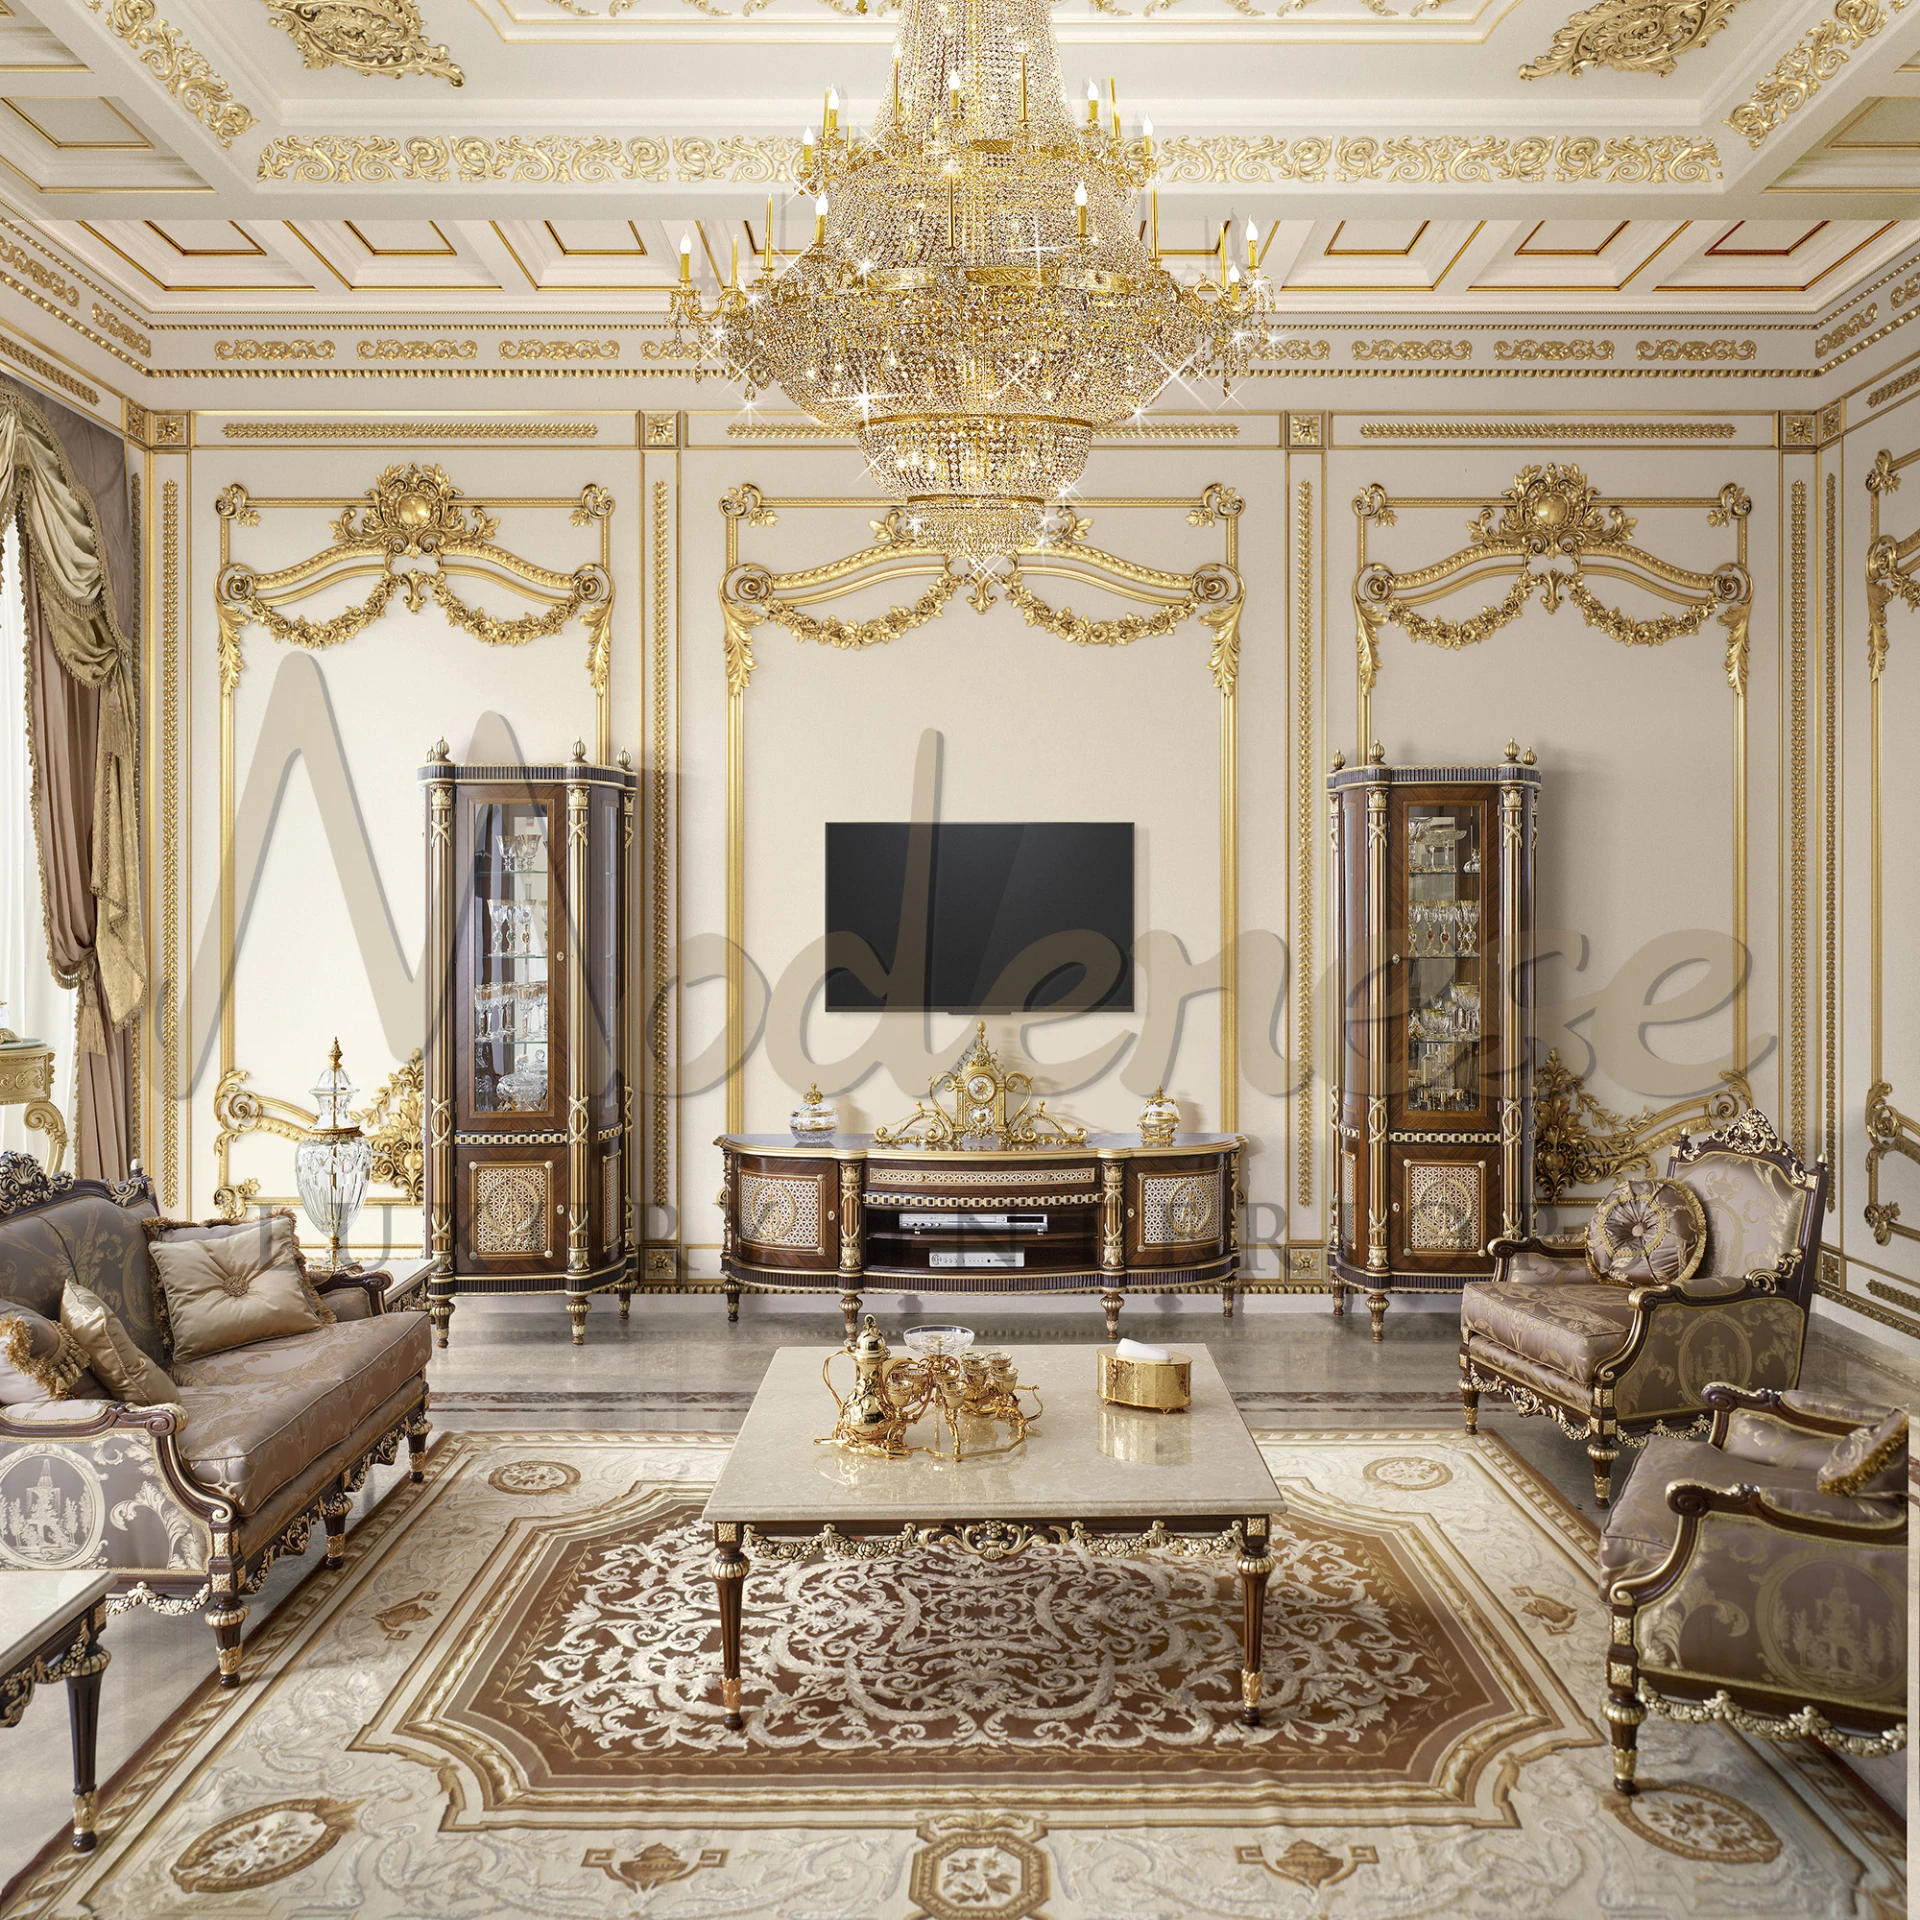 A luxurious grand room with walnut cabinets, luxurious sitting set and golden crystal chandelier